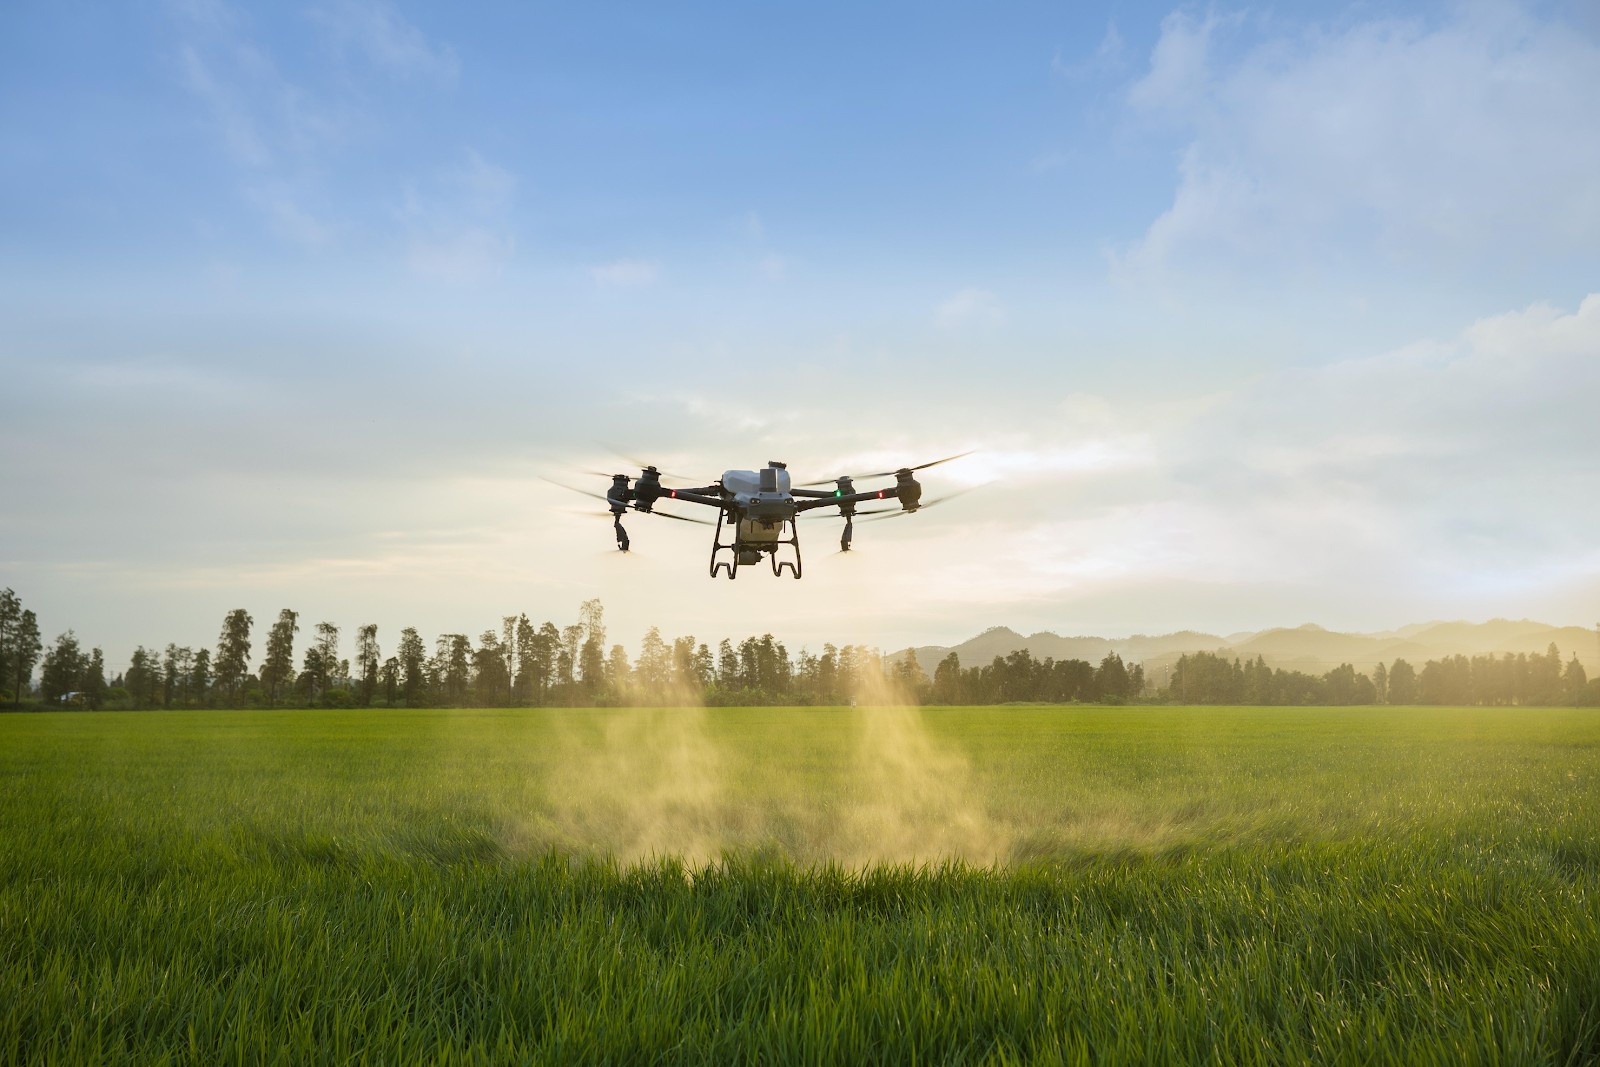 A drone flying over a green field sprays pesticide, with trees and mountains in the background under a blue sky.